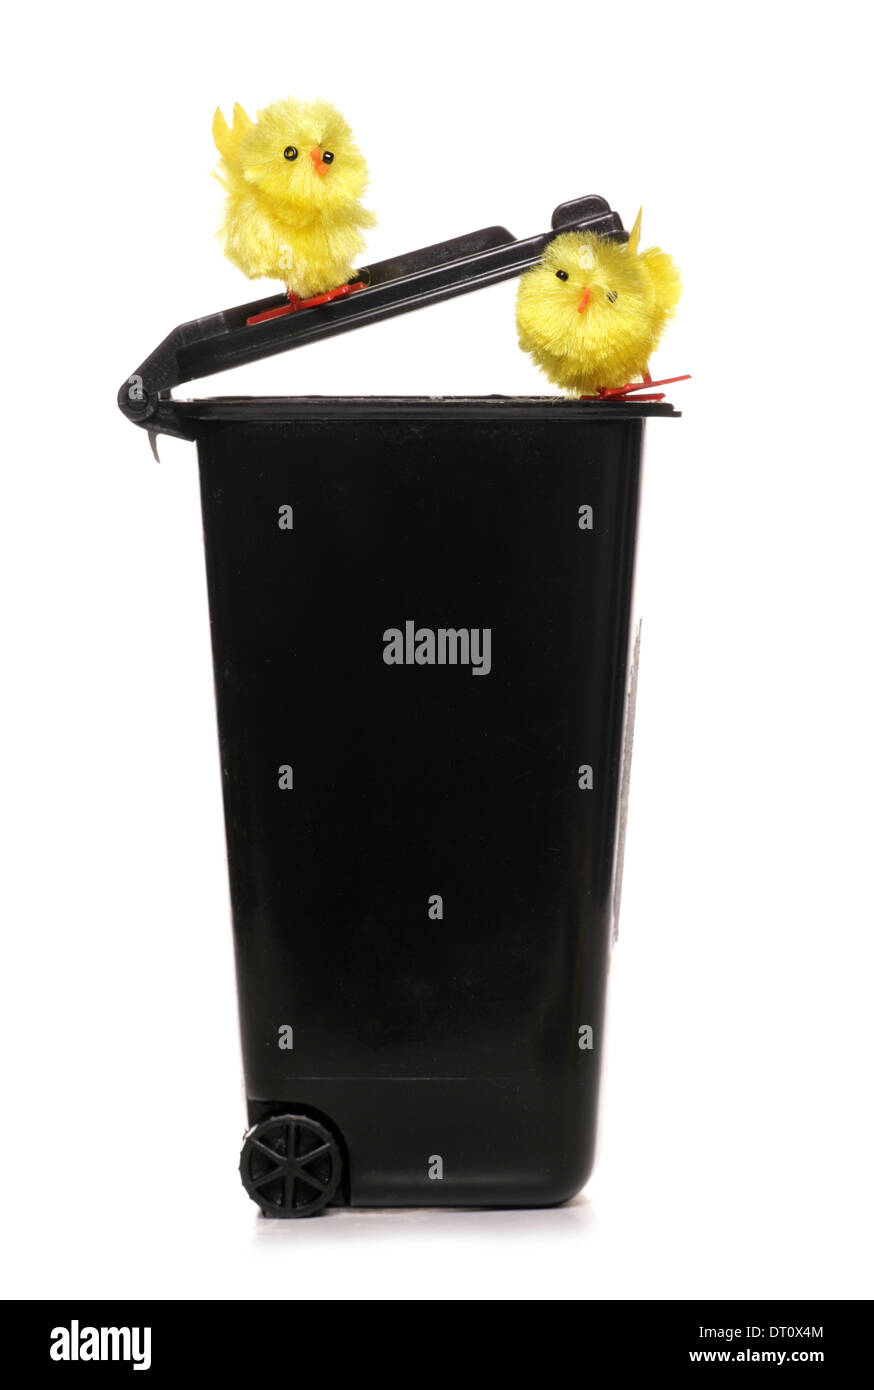 Trash can with easter chicks cutout Stock Photo